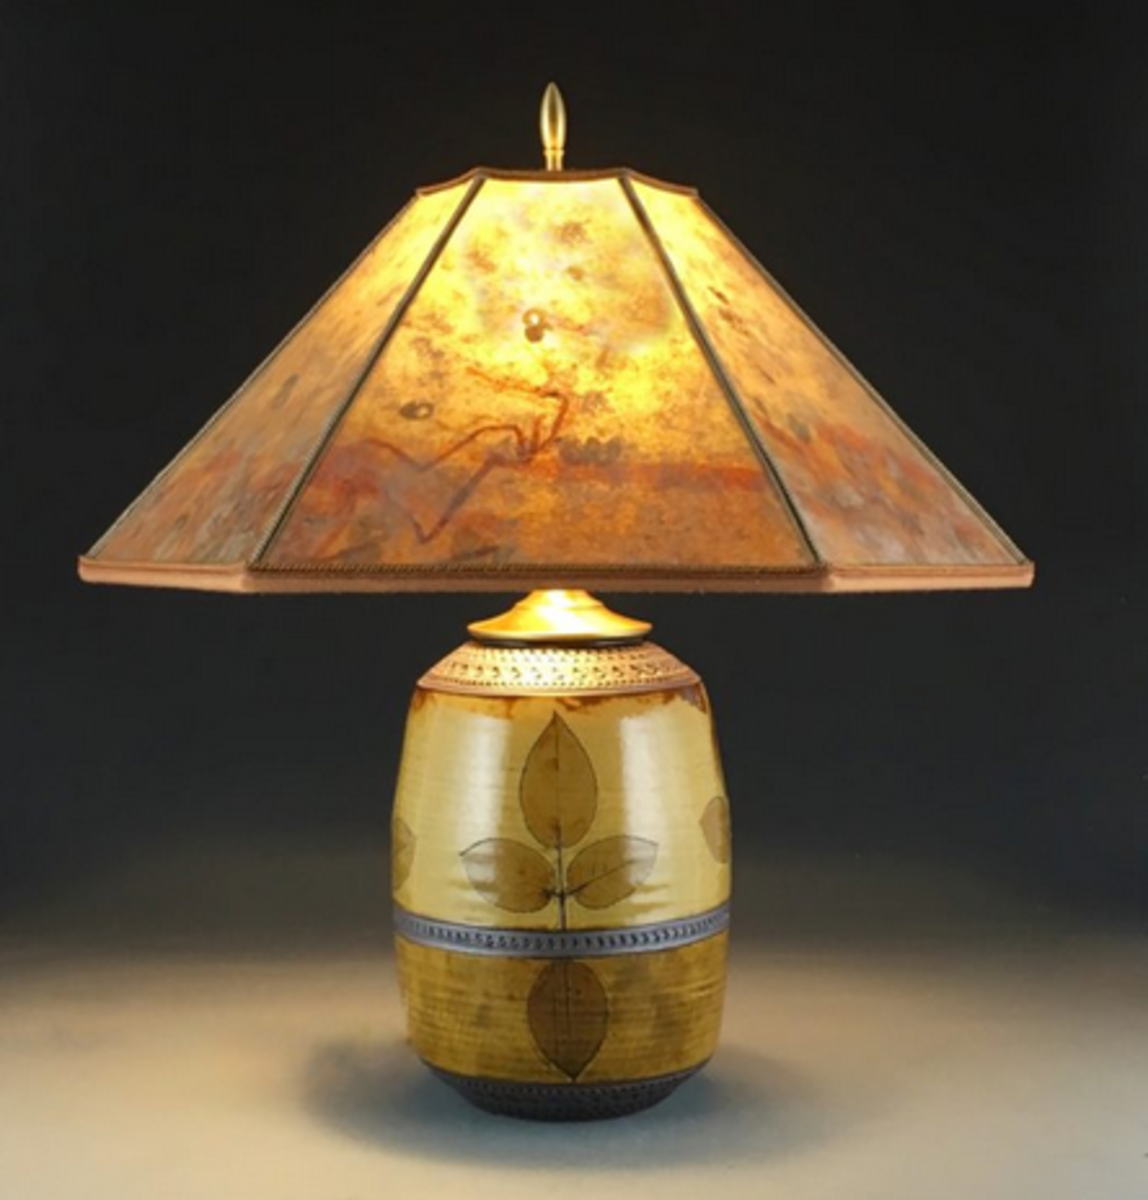 A Revival Of Art Lamps Design For The, Small Craftsman Table Lamp